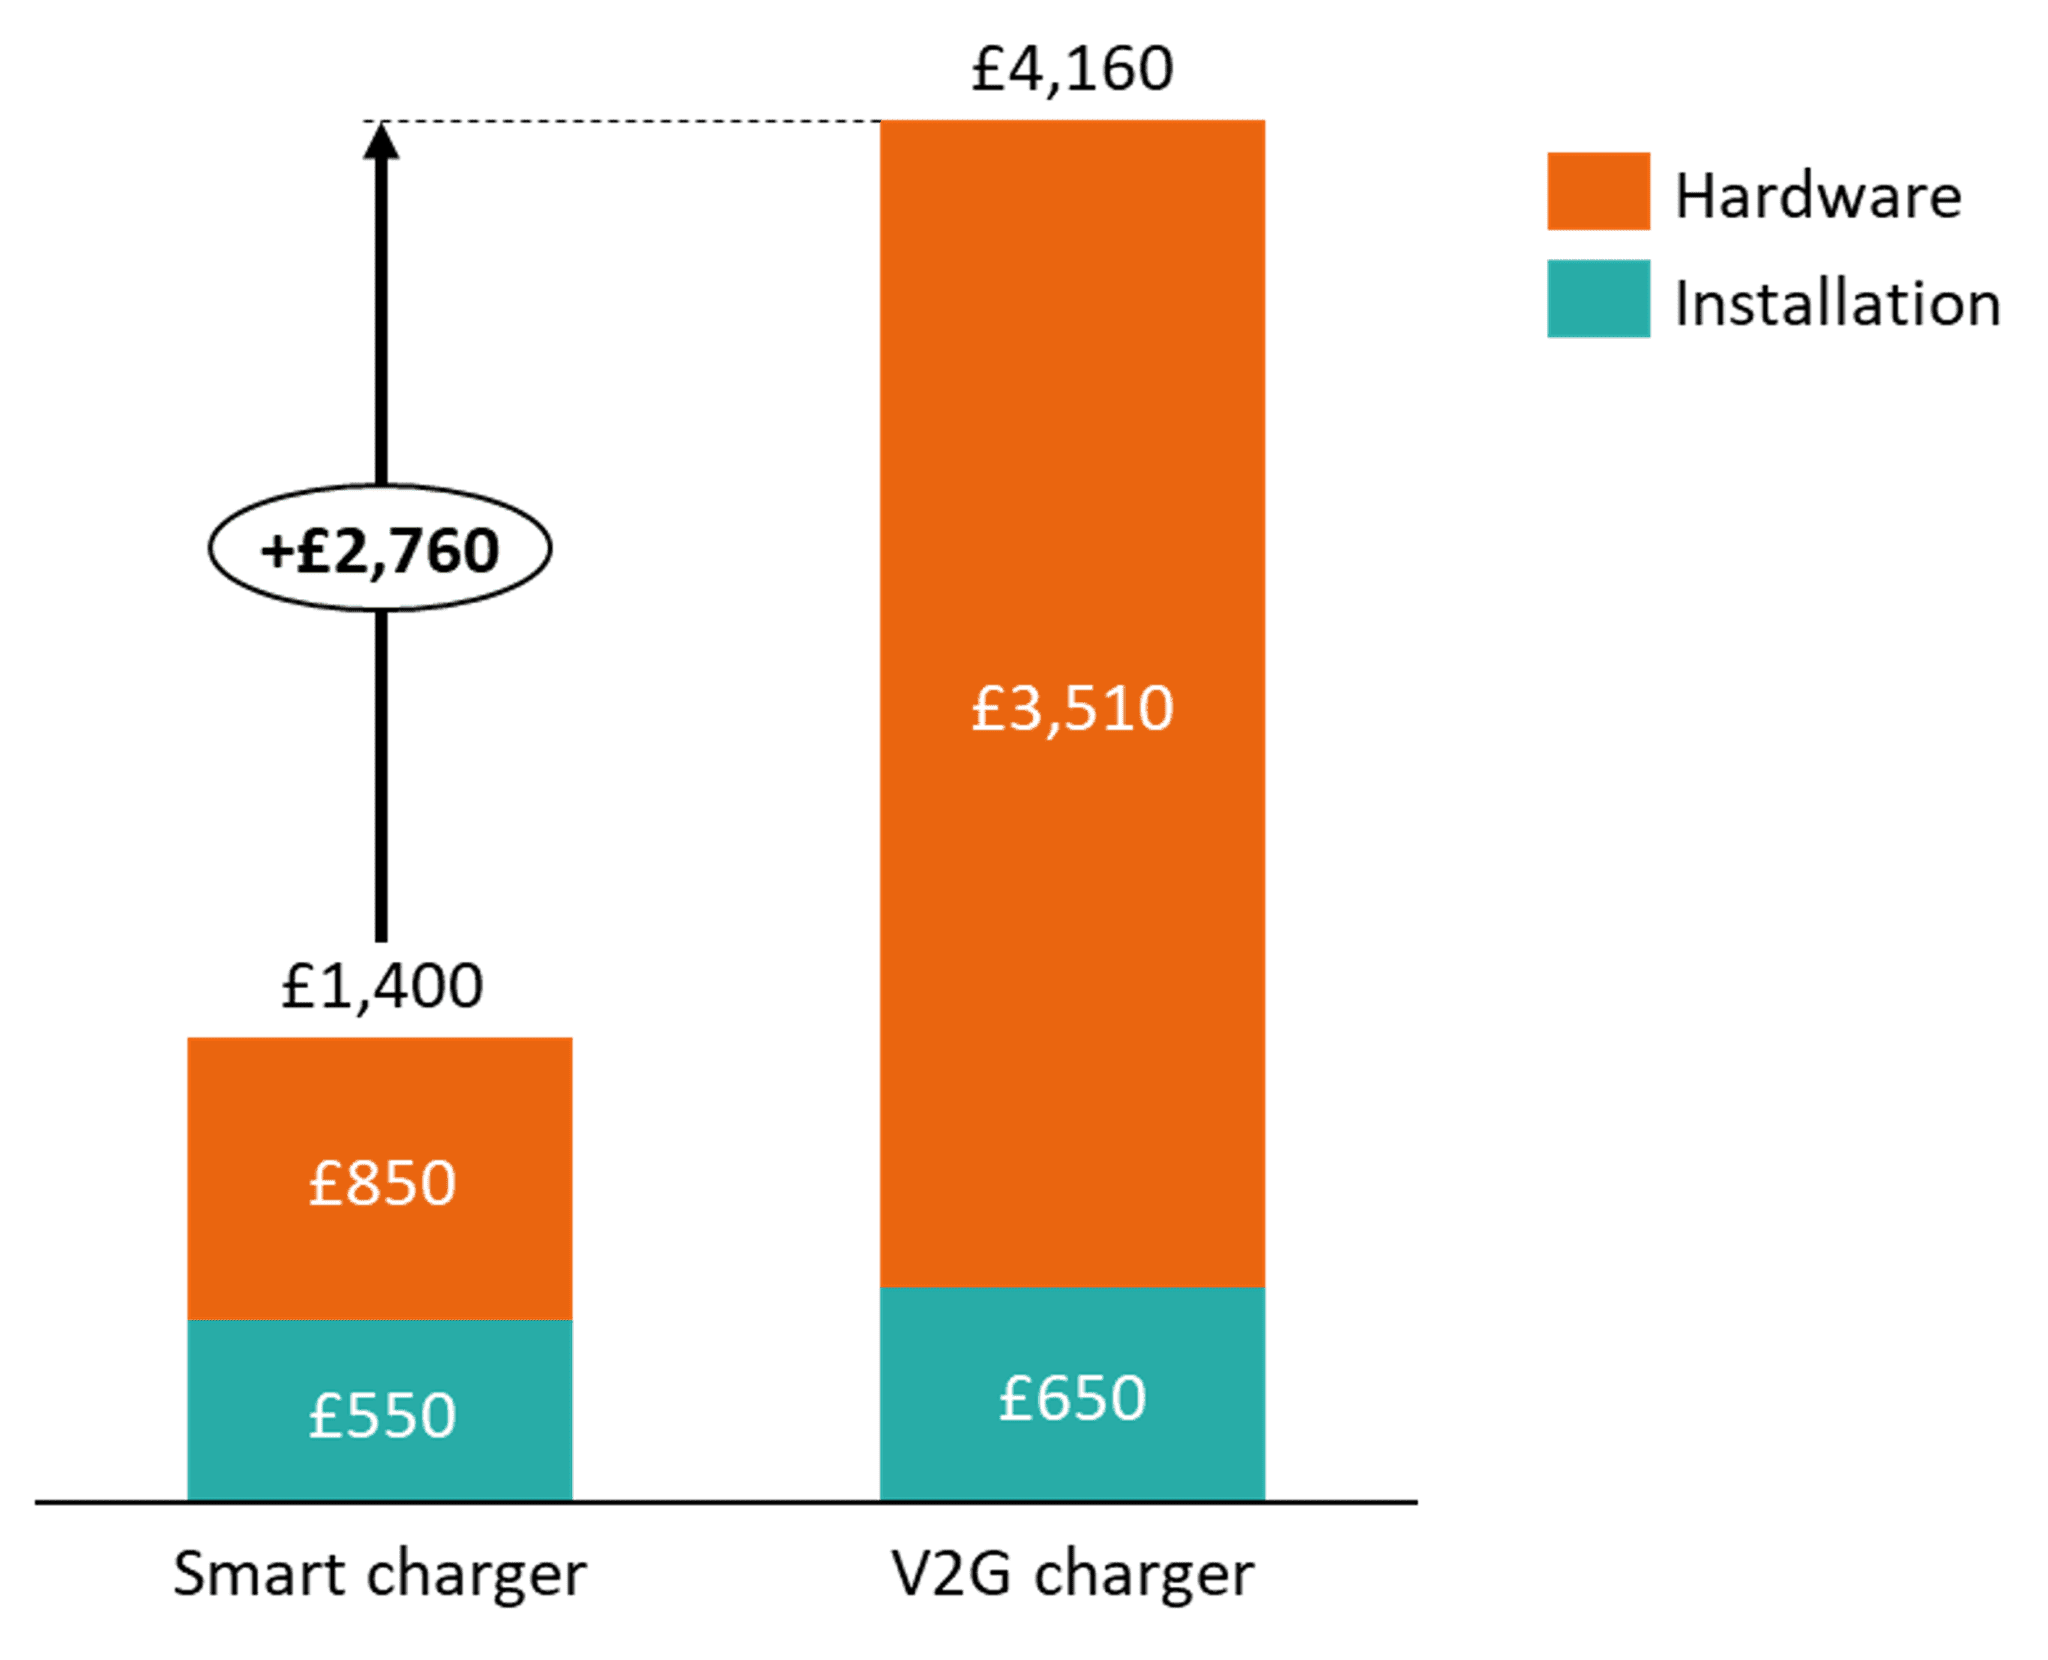 A bar chart showing the hardware and installation costs of a smart charger versus that of a vehicle-to-grid charger. The smart charger costs are 1,400 pounds which is 2,760 pounds less than a vehicle-to-grid charger, which is priced at 4,160 pounds. In terms of the cost breakdowns for both charts, for smart chargers, hardware costs account for £850 and installation costs account for £550. For vehicle-to-grid chargers, hardware costs account for £3,510 while installation costs account for £650. 